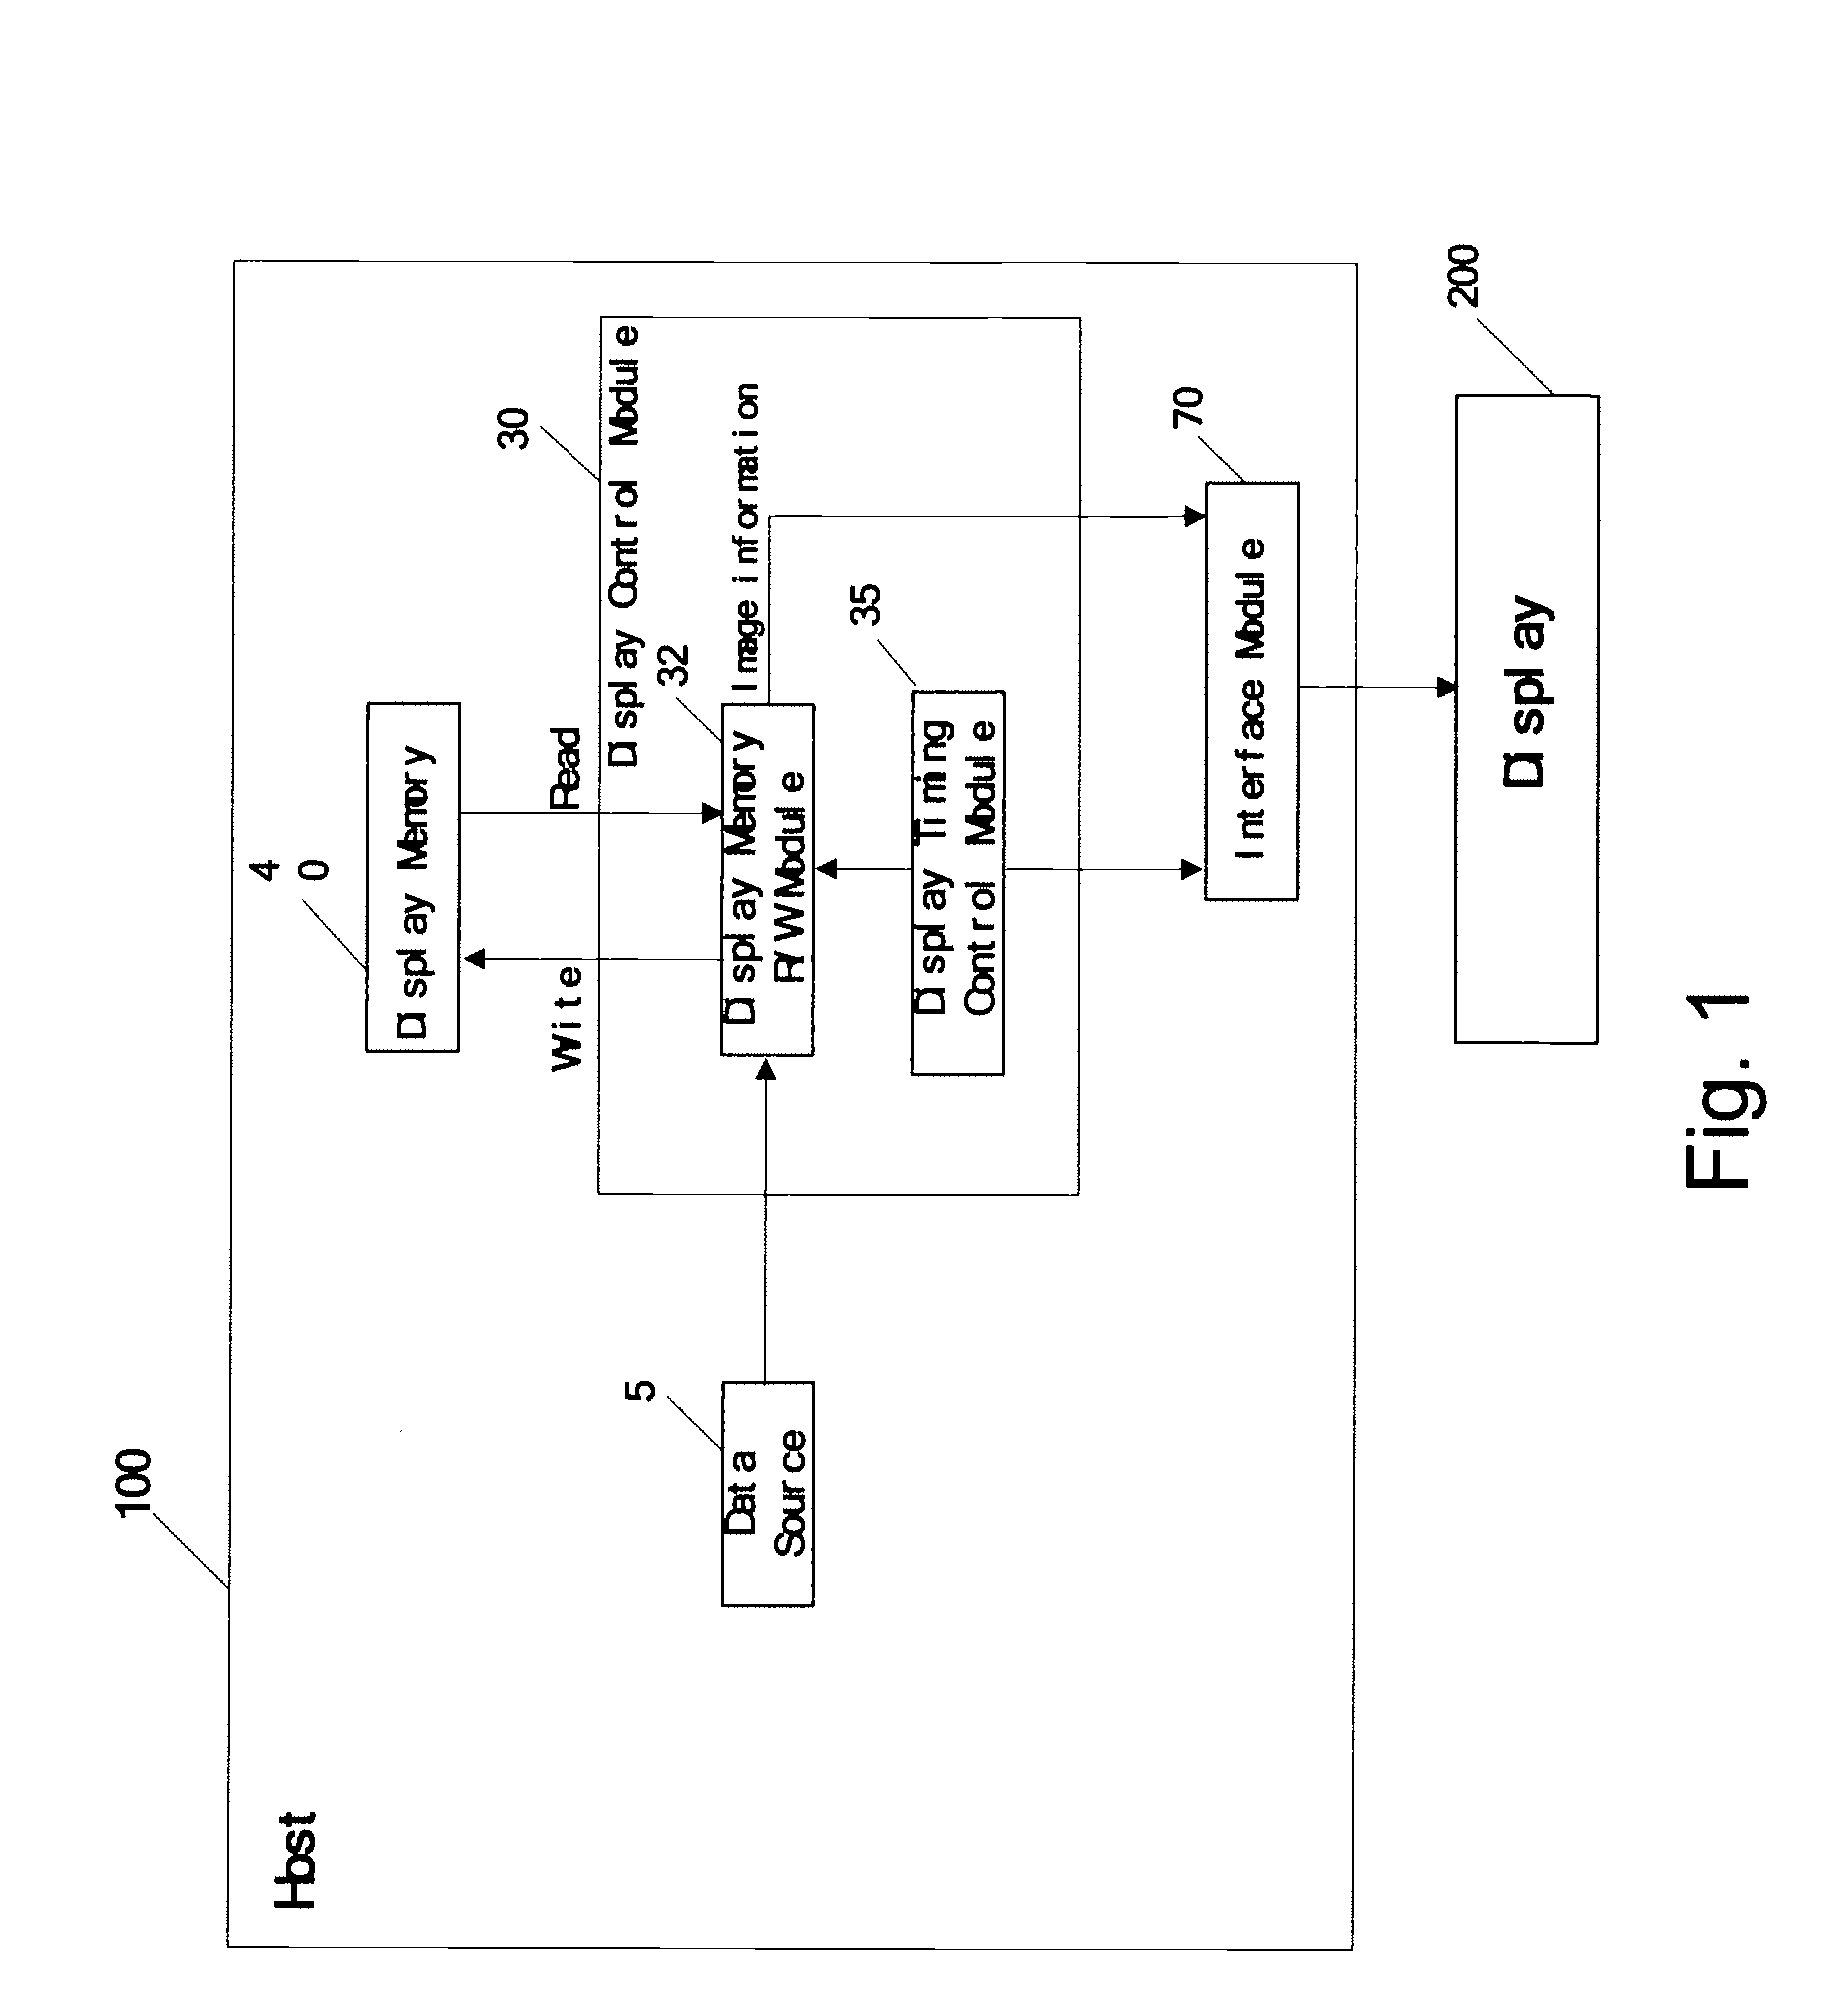 Apparatus and Method for Adaptively Adjusting Display Parameters